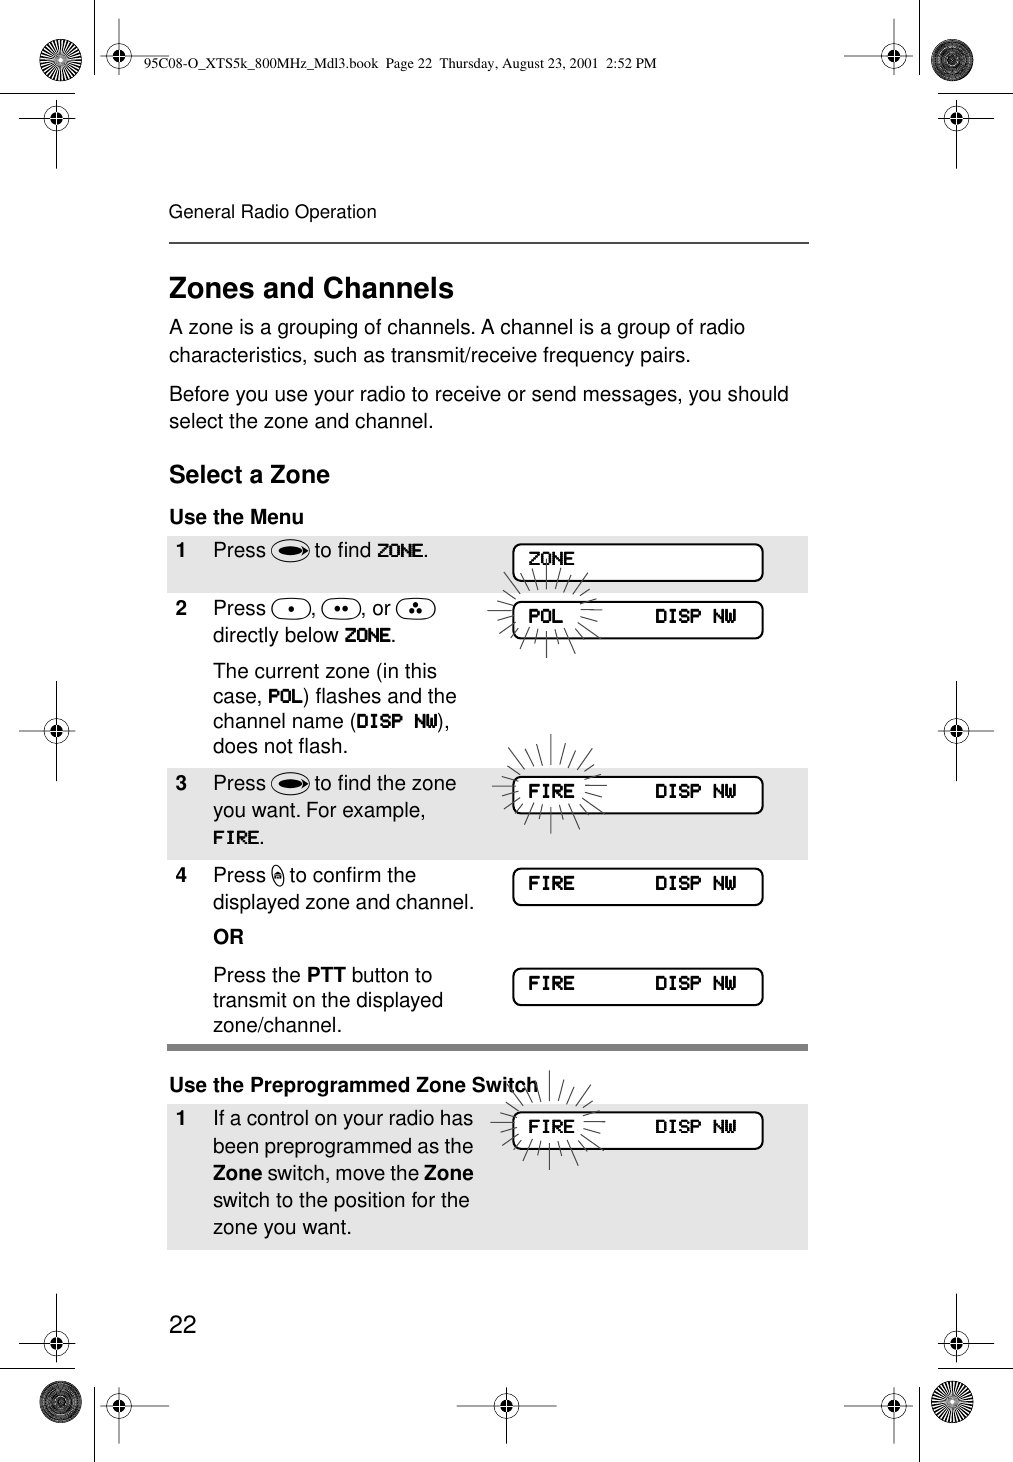 22General Radio OperationZones and ChannelsA zone is a grouping of channels. A channel is a group of radio characteristics, such as transmit/receive frequency pairs. Before you use your radio to receive or send messages, you should select the zone and channel.Select a ZoneUse the Menu Use the Preprogrammed Zone Switch1Press U to ﬁnd ZZZZOOOONNNNEEEE.2Press D, E, or F directly below ZZZZOOOONNNNEEEE.The current zone (in this case, PPPPOOOOLLLL) ﬂashes and the channel name (DDDDIIIISSSSPPPP    NNNNWWWW), does not ﬂash.3Press U to ﬁnd the zone you want. For example, FFFFIIIIRRRREEEE.4Press h to conﬁrm the displayed zone and channel. ORPress the PTT button to transmit on the displayed zone/channel.1If a control on your radio has been preprogrammed as the Zone switch, move the Zone switch to the position for the zone you want. ZZZZOOOONNNNEEEEPPPPOOOOLLLL                                DDDDIIIISSSSPPPP    NNNNWWWWFFFFIIIIRRRREEEE                            DDDDIIIISSSSPPPP    NNNNWWWWFFFFIIIIRRRREEEE                            DDDDIIIISSSSPPPP    NNNNWWWWFFFFIIIIRRRREEEE                            DDDDIIIISSSSPPPP    NNNNWWWWFFFFIIIIRRRREEEE                            DDDDIIIISSSSPPPP    NNNNWWWW95C08-O_XTS5k_800MHz_Mdl3.book  Page 22  Thursday, August 23, 2001  2:52 PM